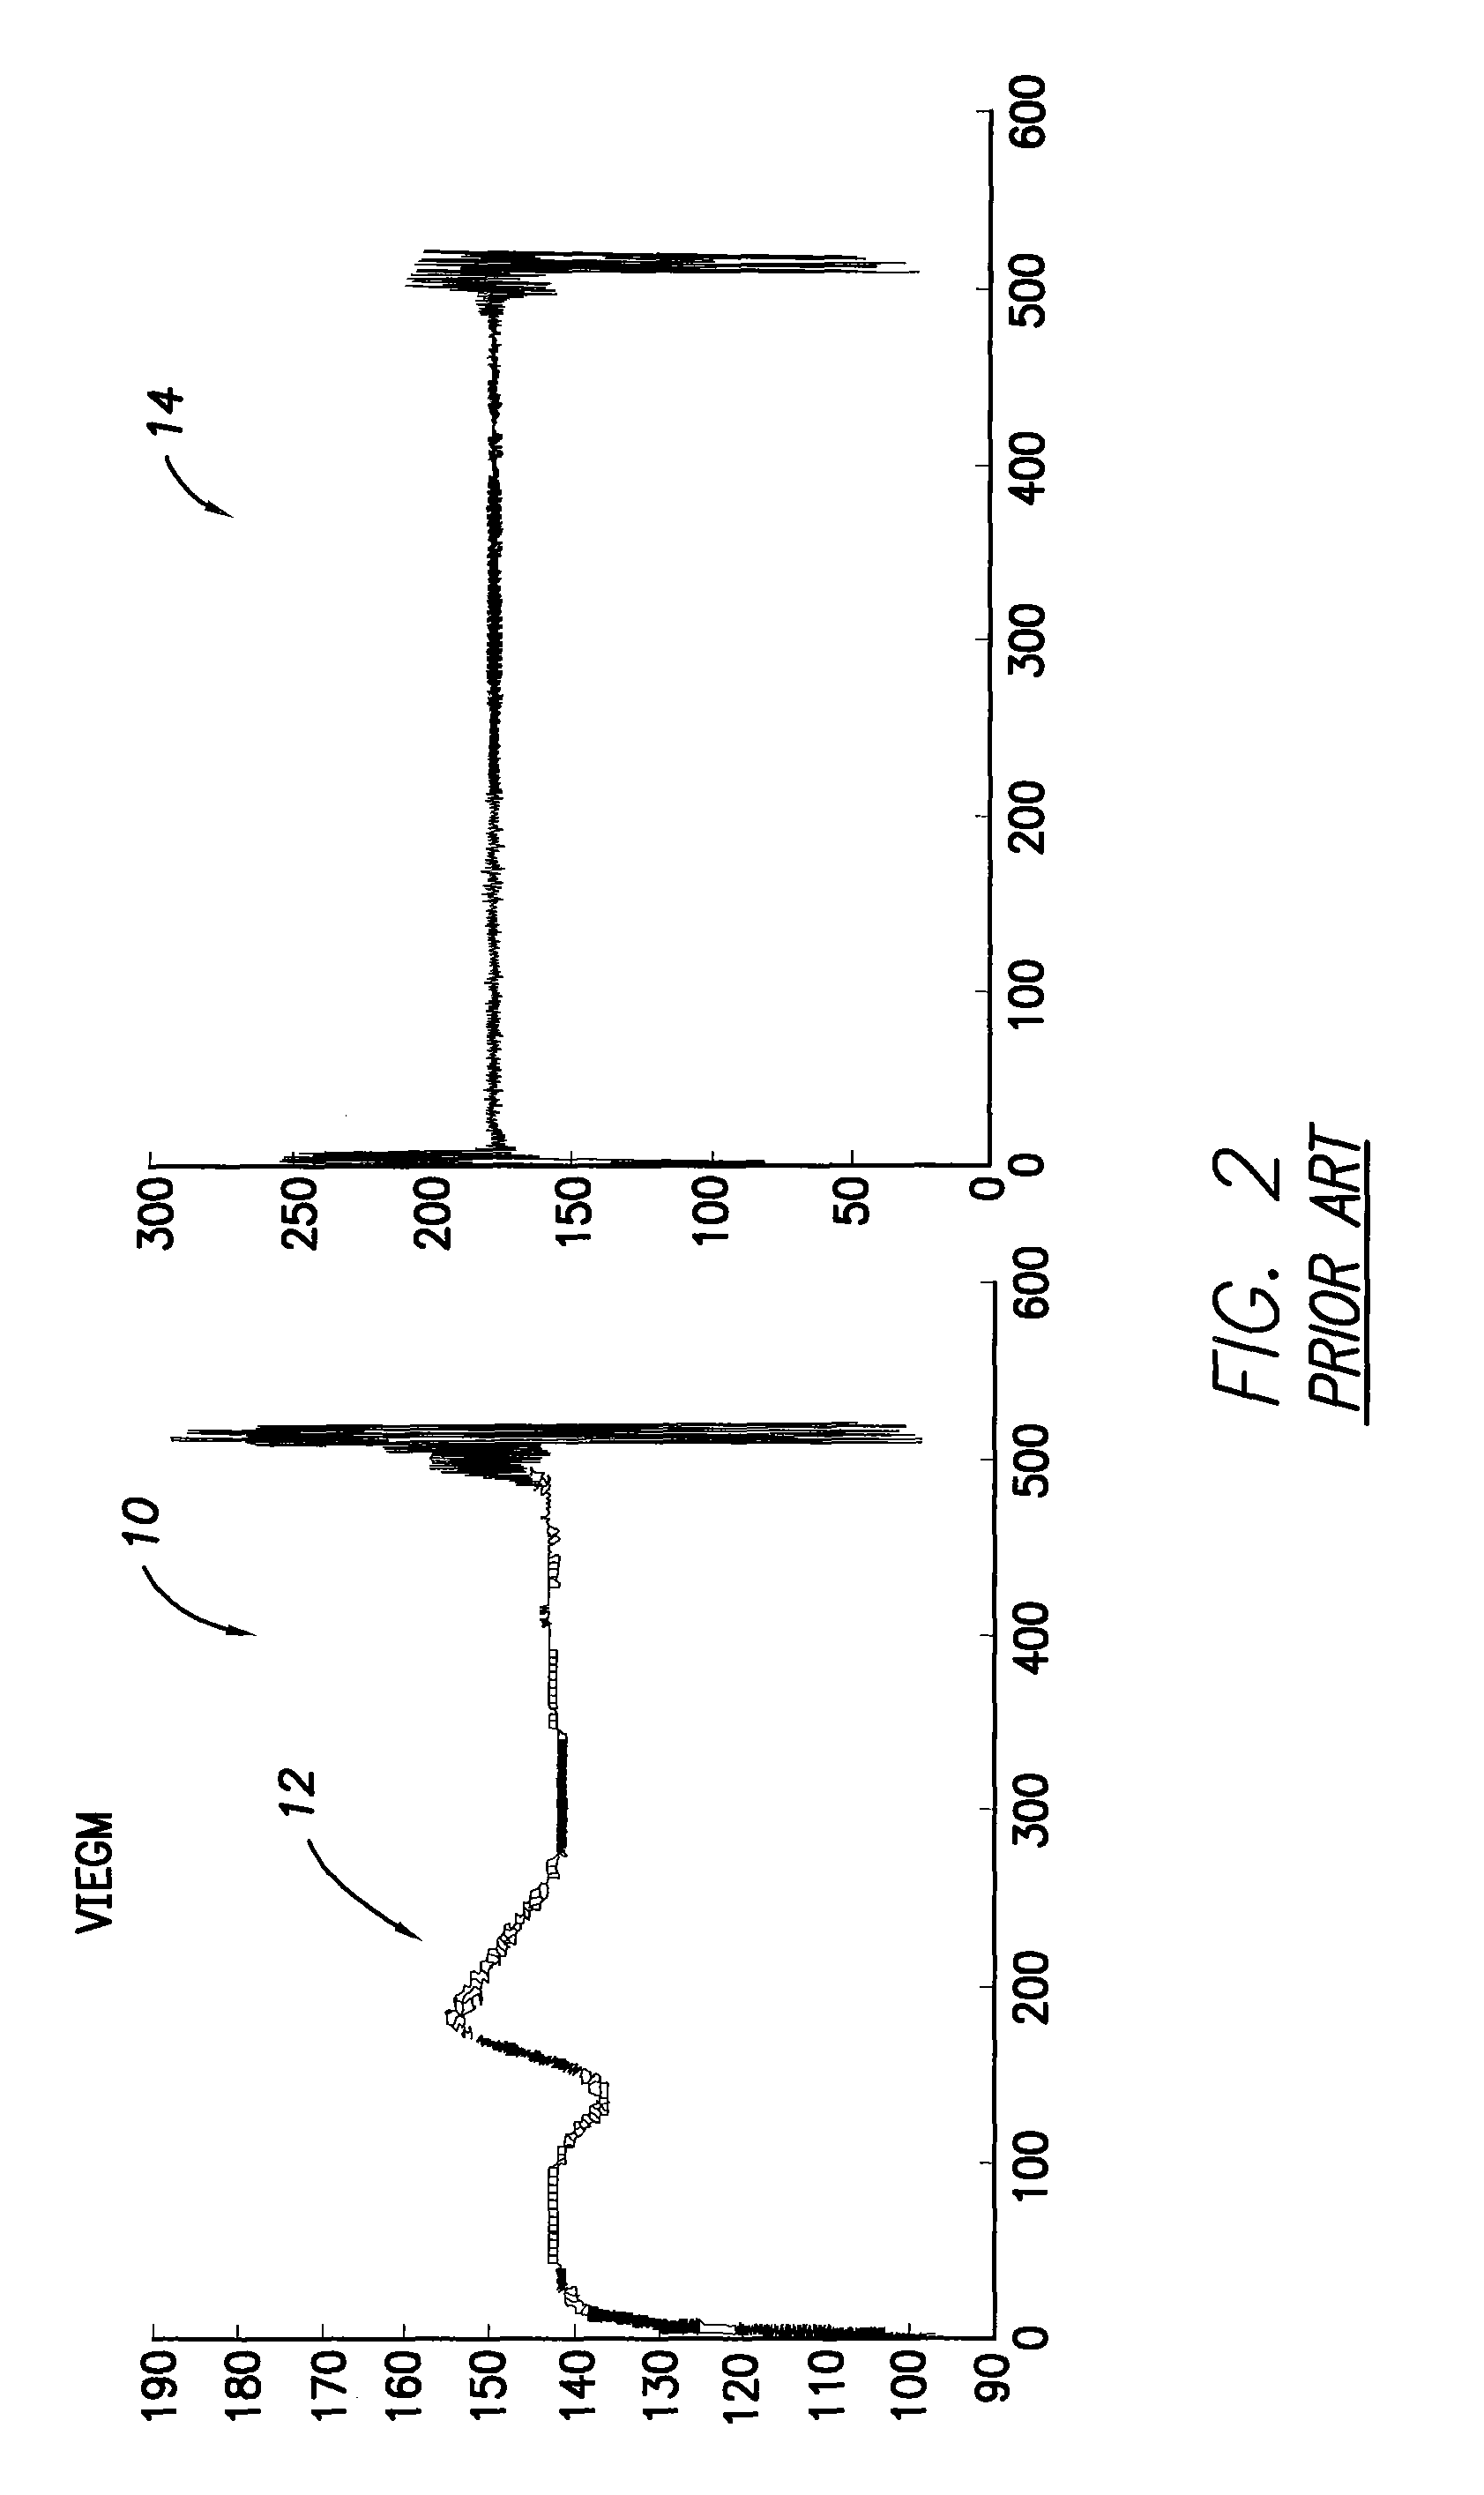 Systems and methods for employing multiple filters to detect T-wave oversensing and to improve tachyarrhythmia detection within an implantable medical device